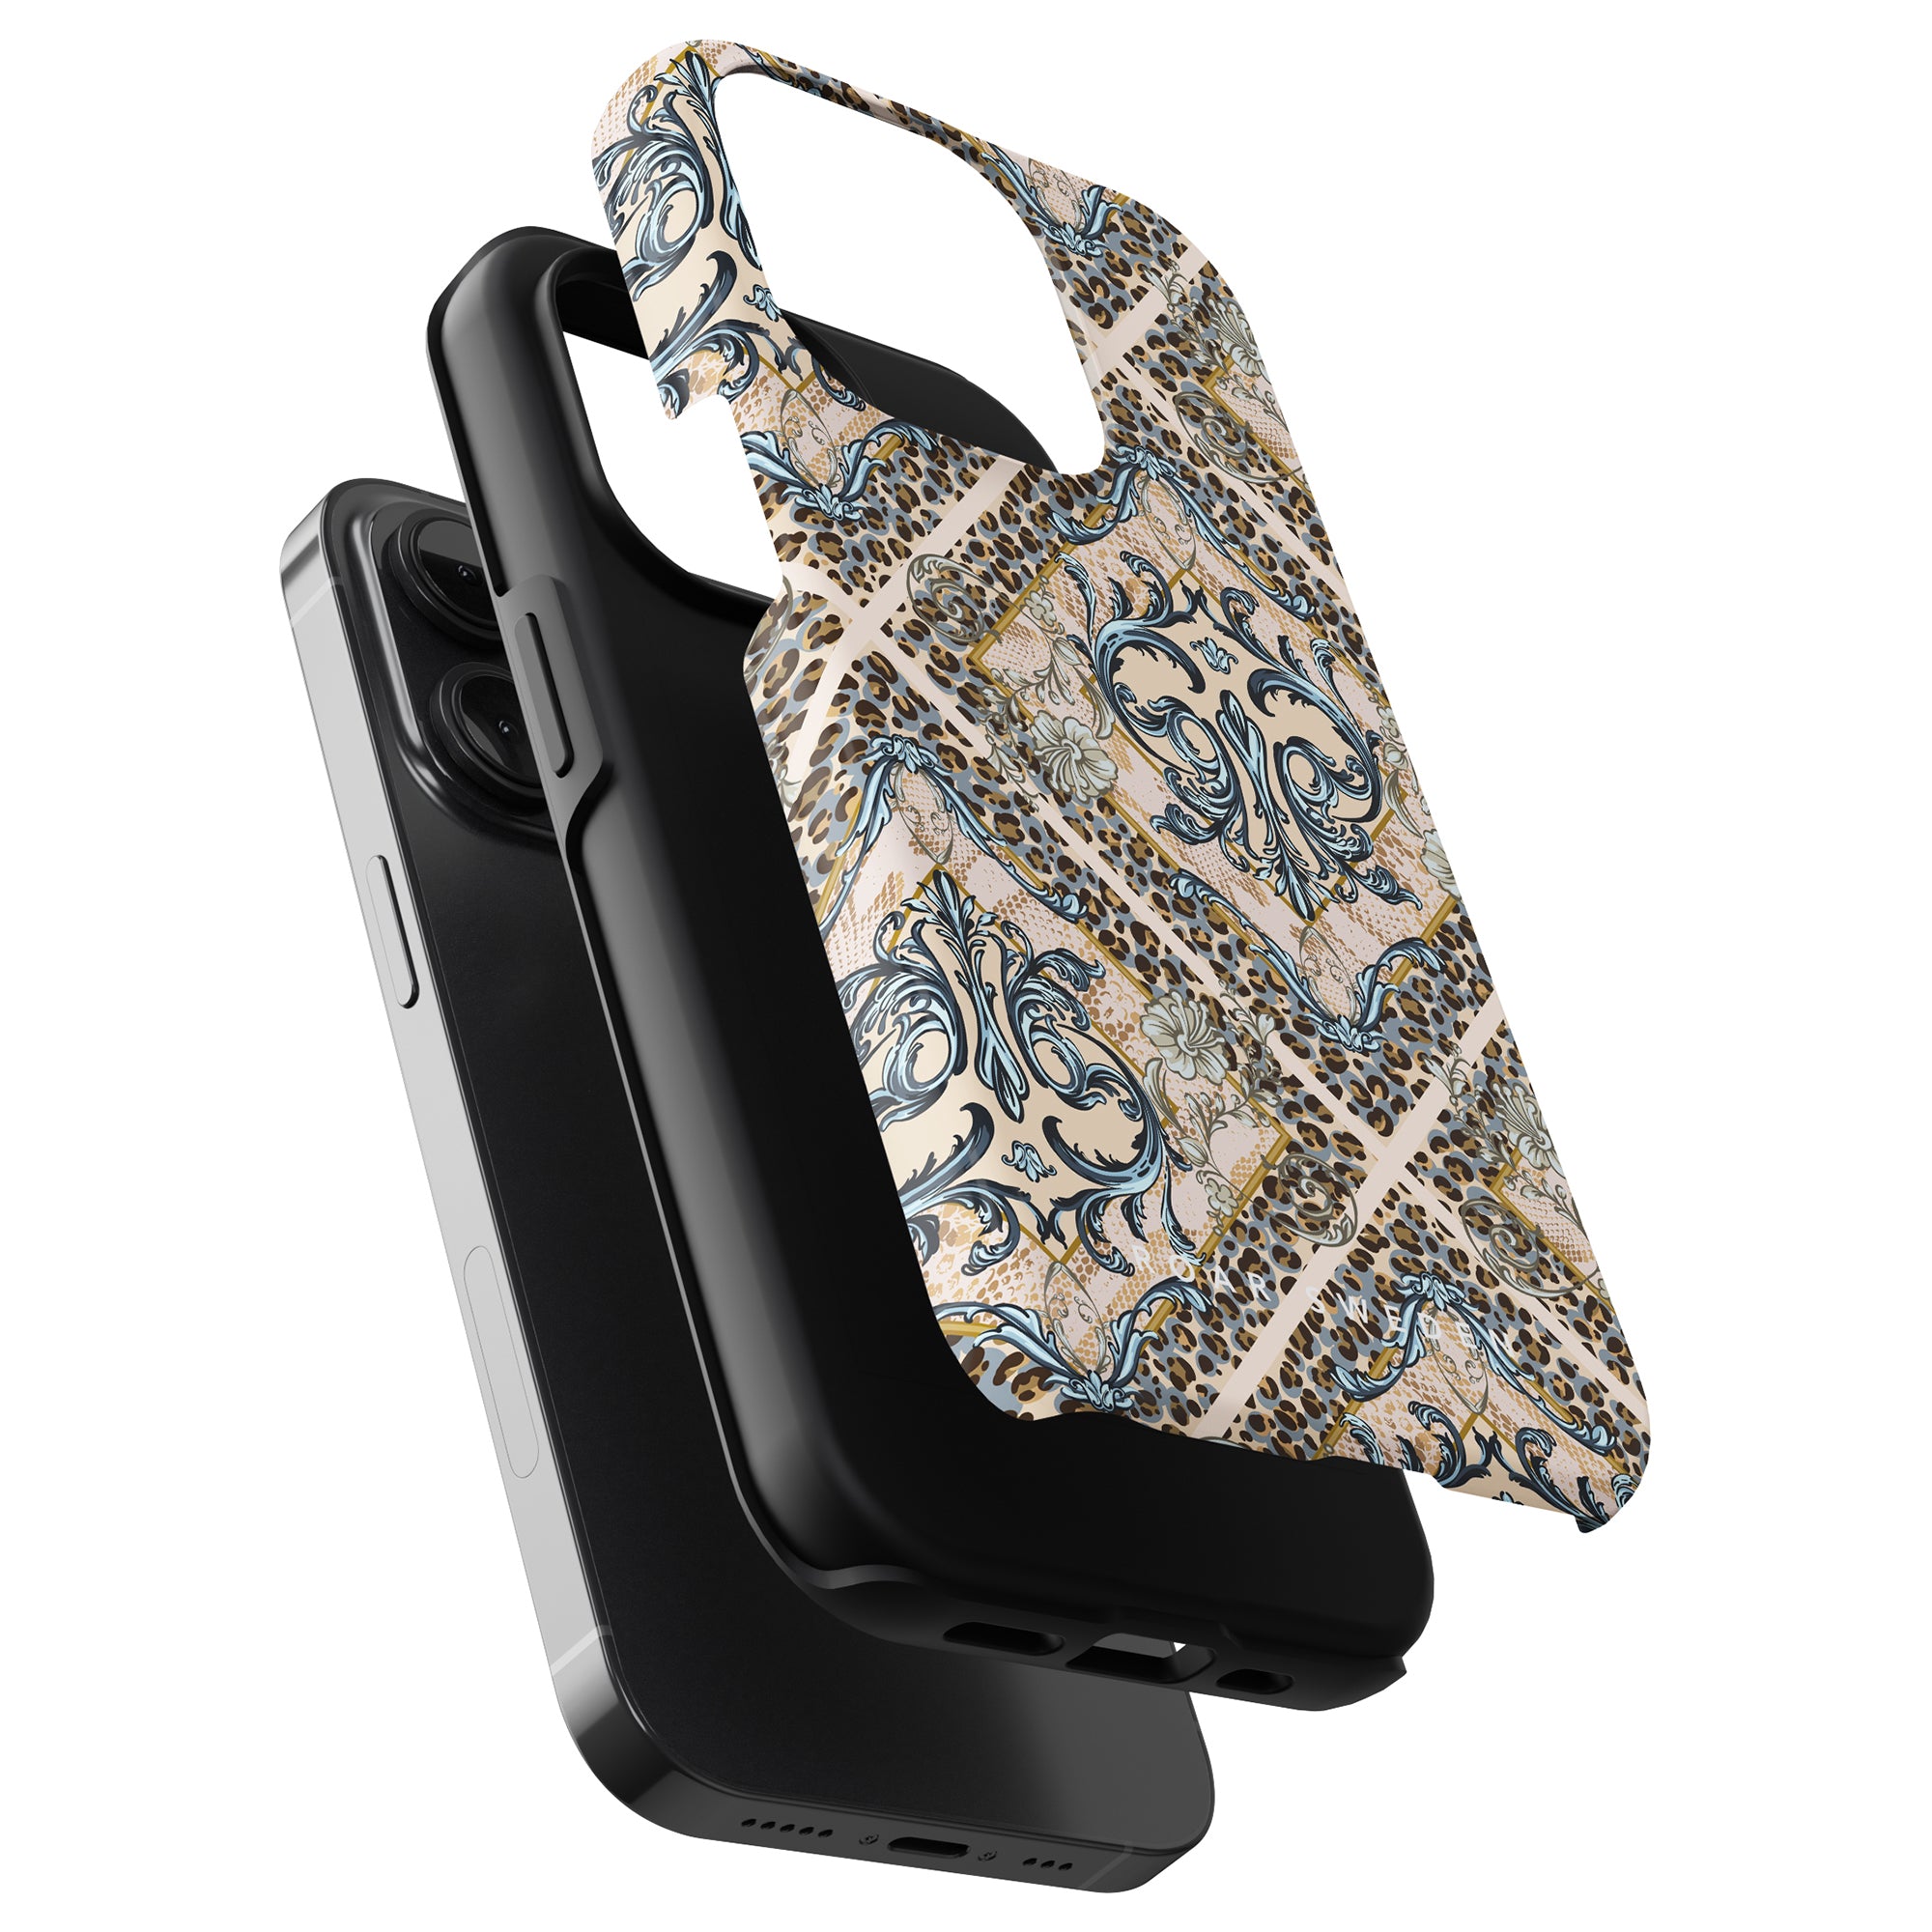 Two Leonard - Tough Case smartphones with a patterned fabric carrying pouch from the hybrid-kollektion.